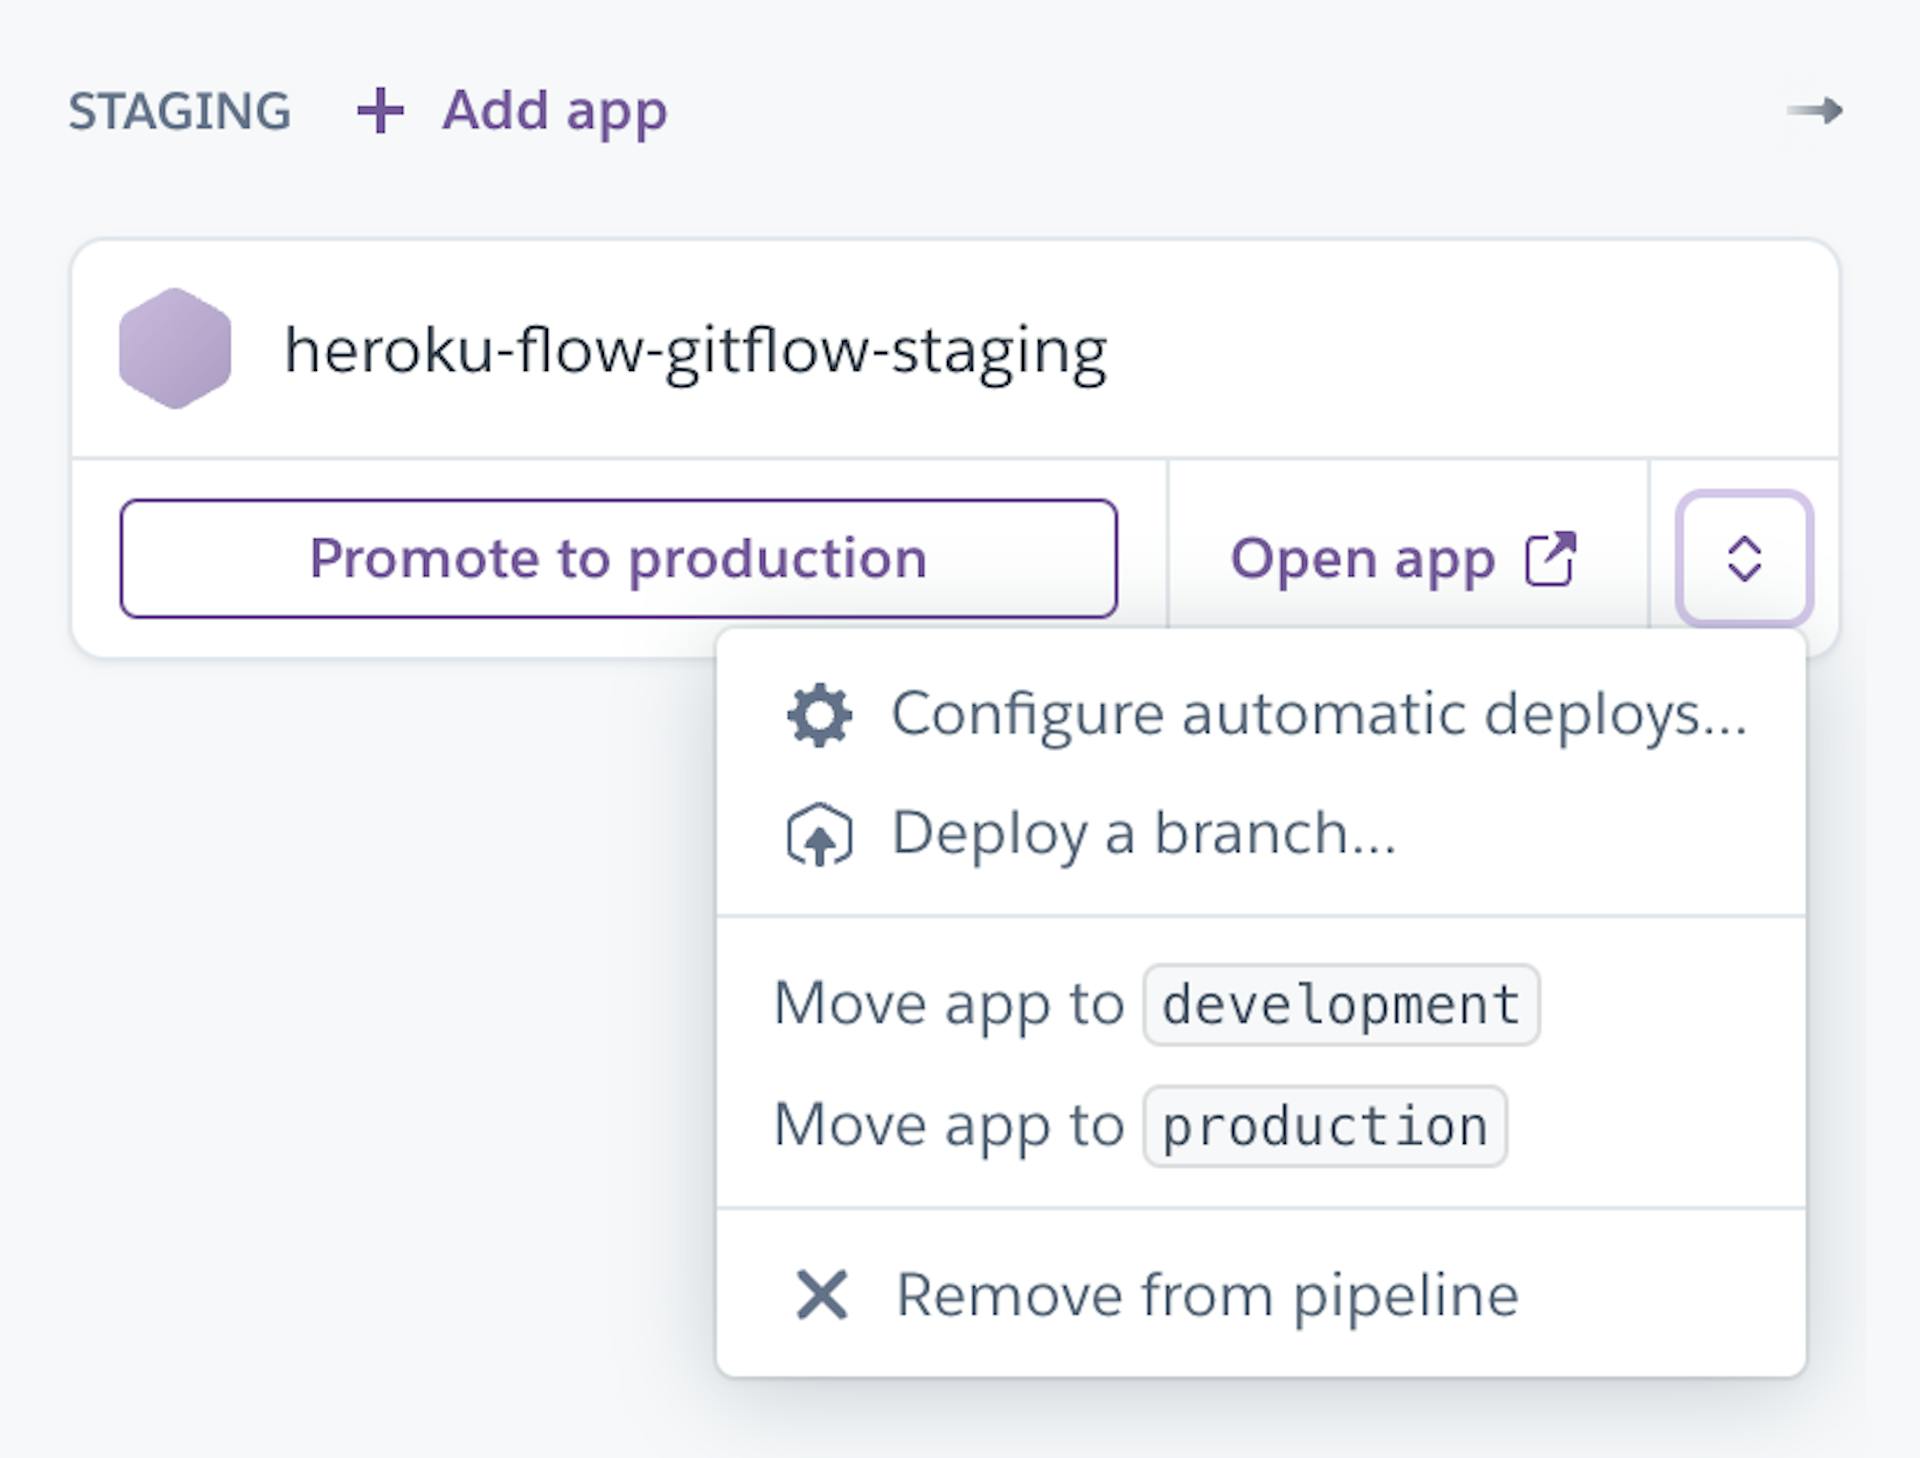 Configure automatic deploys for the staging app